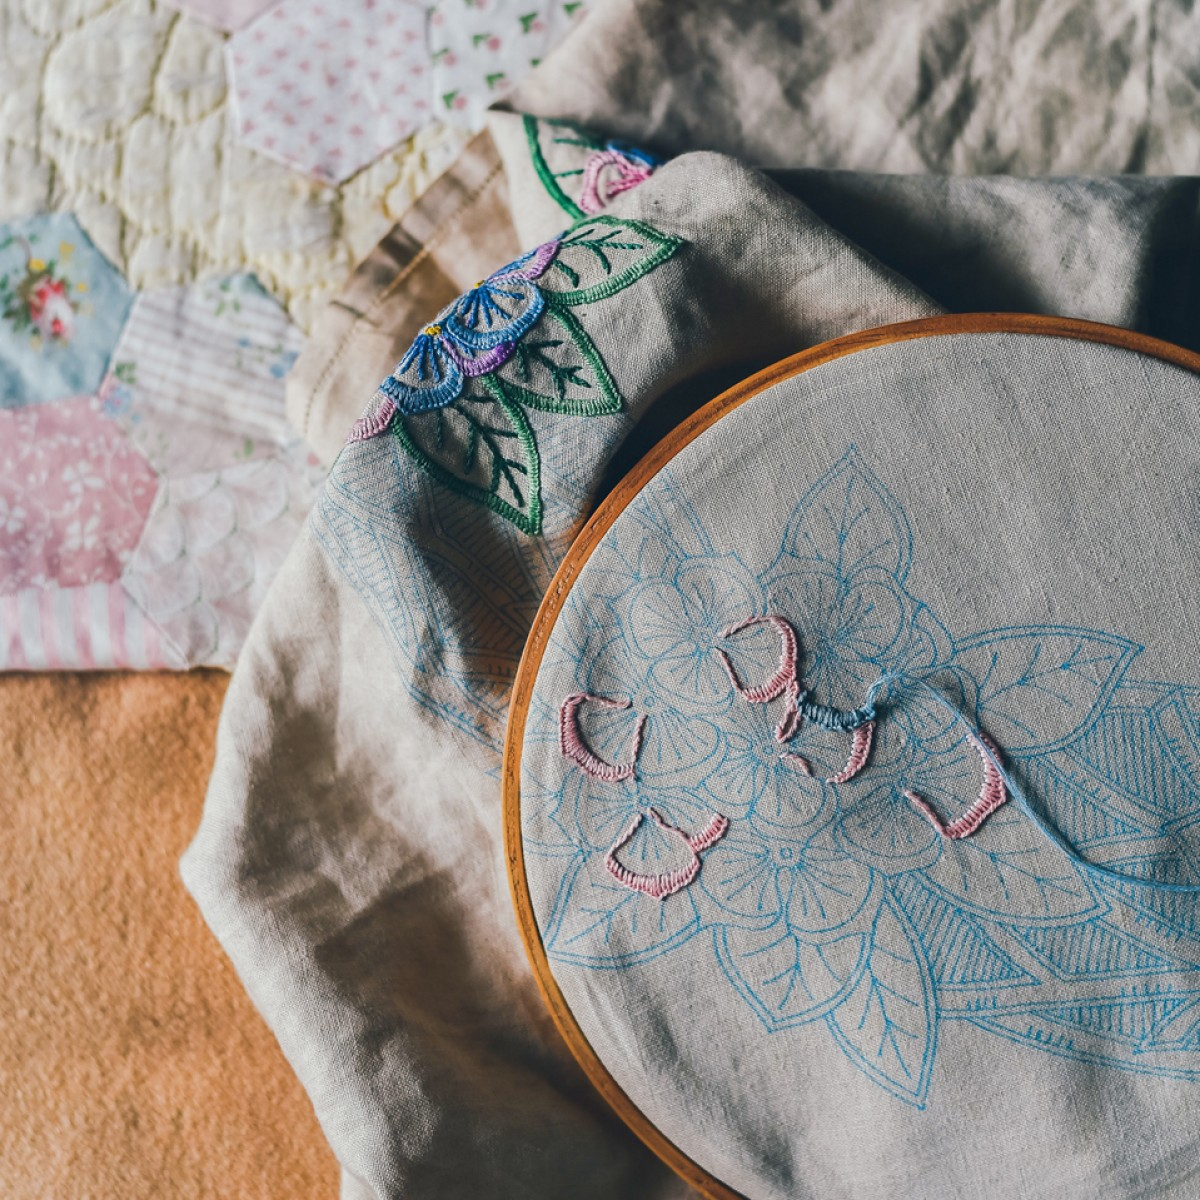 Convert Picture To Embroidery Pattern 5 Simple Ways To Transfer Embroidery Designs